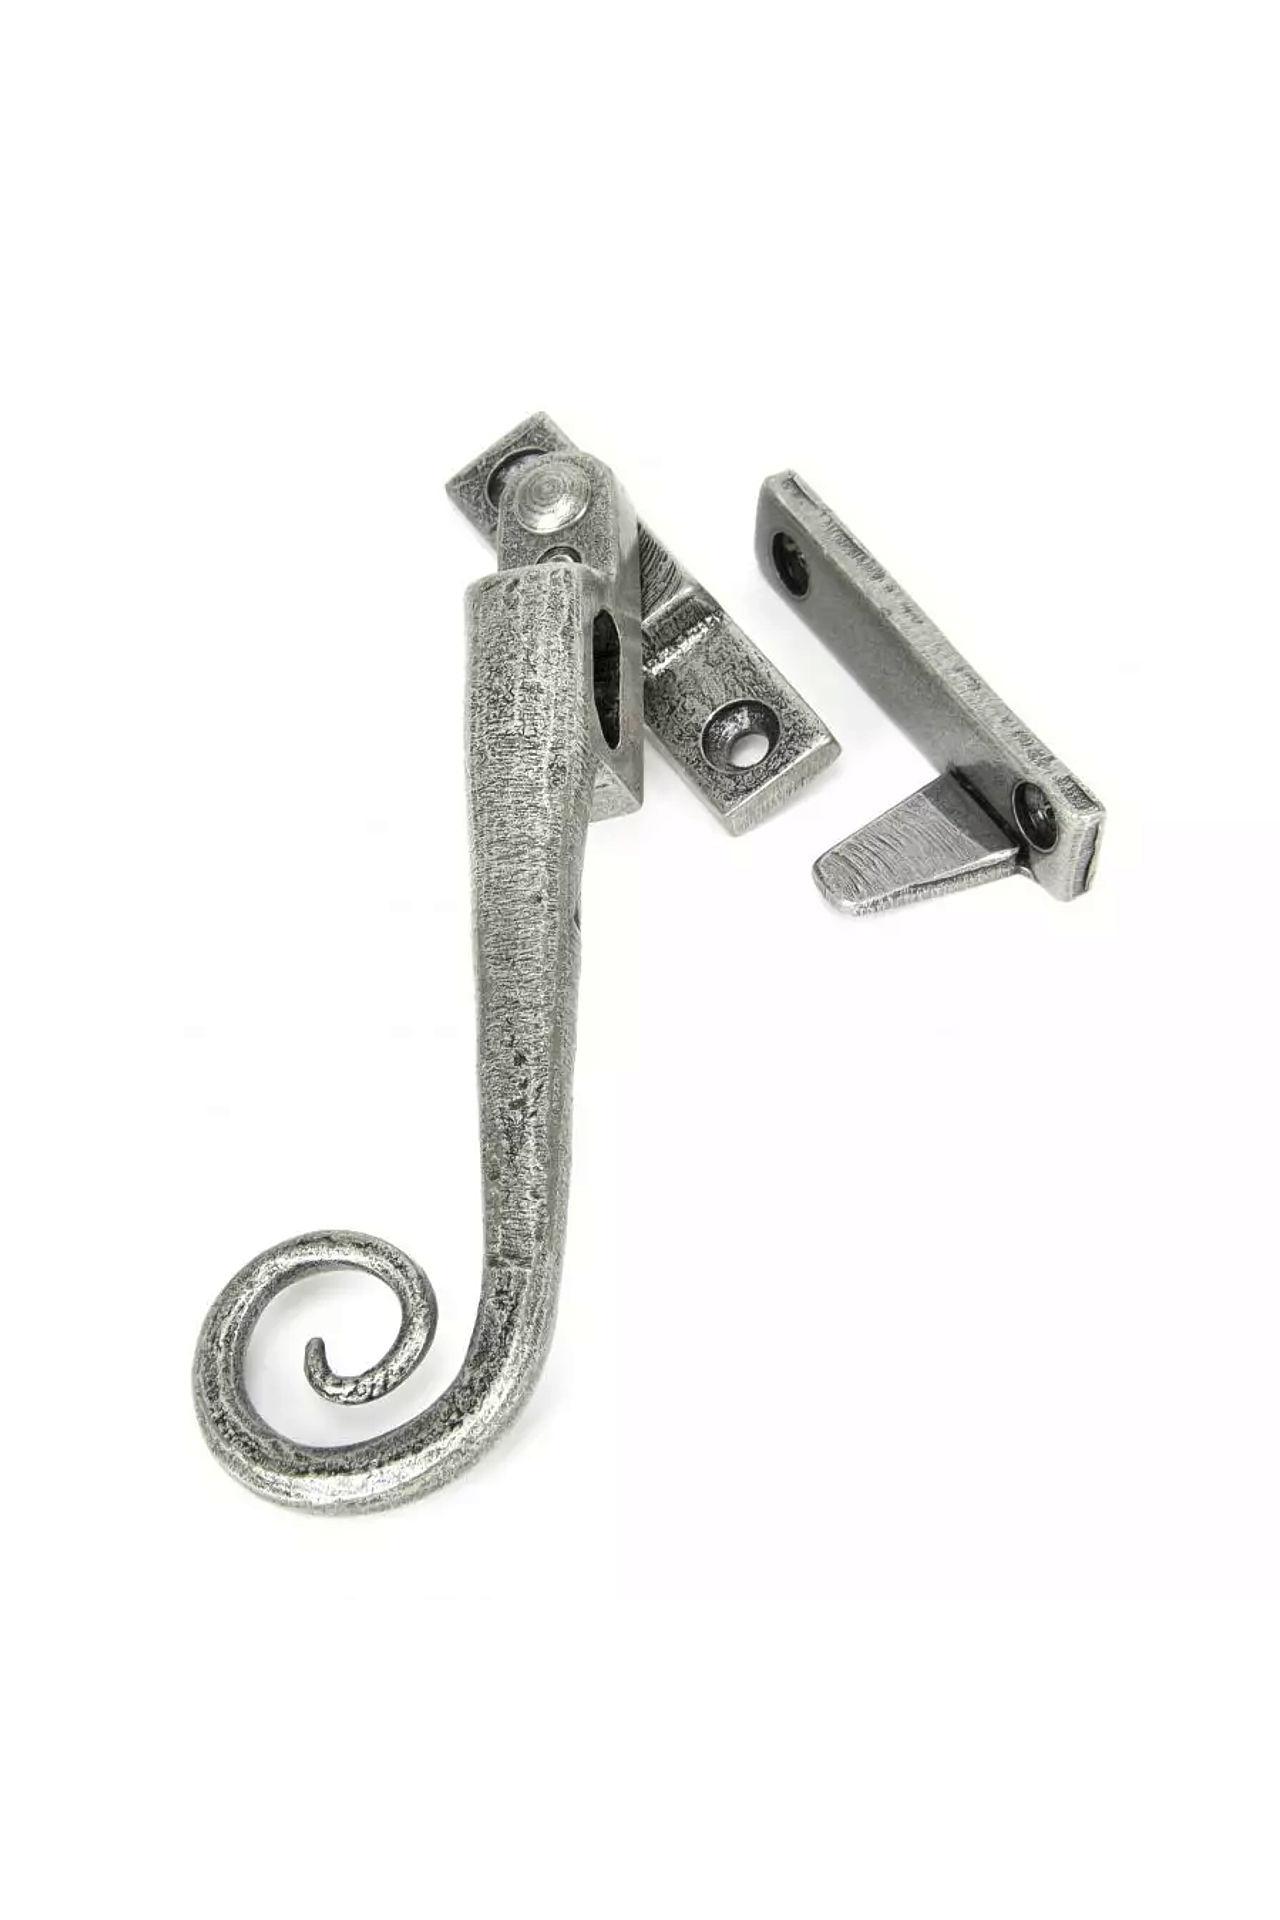 NEW From The Anvil Pewter Locking Night-Vent Monkeytail Fastener - LH